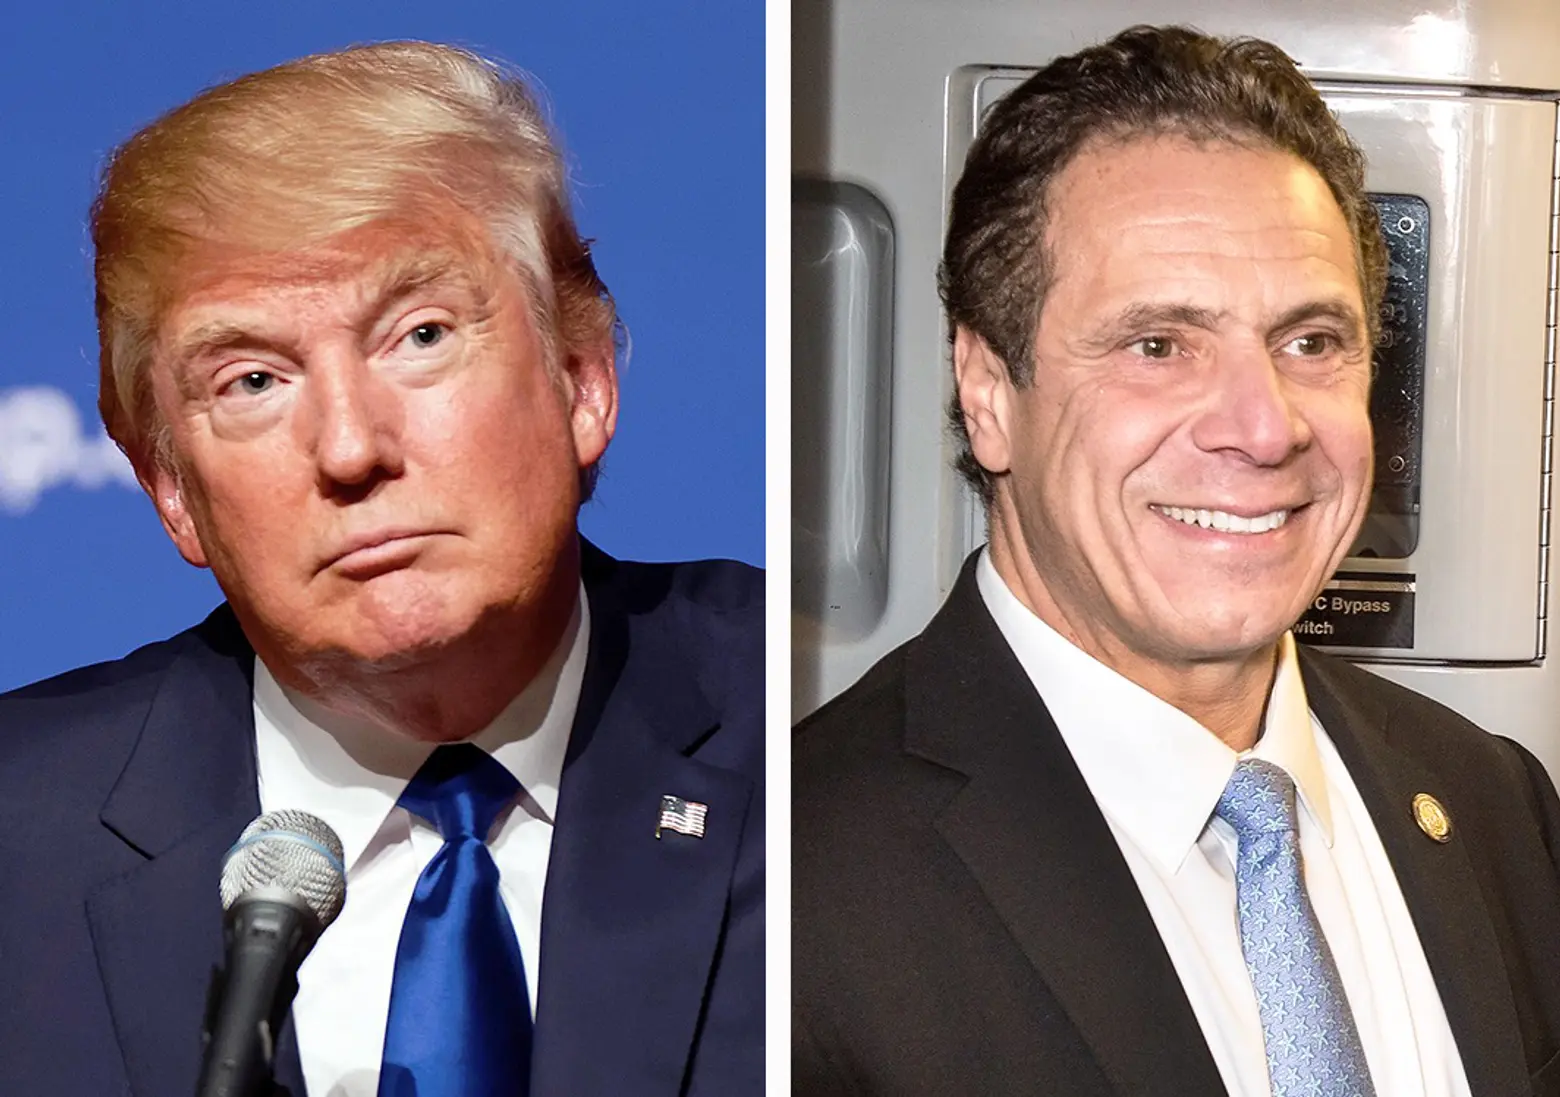 Following meeting with Trump, Cuomo says New York will double COVID testing capacity